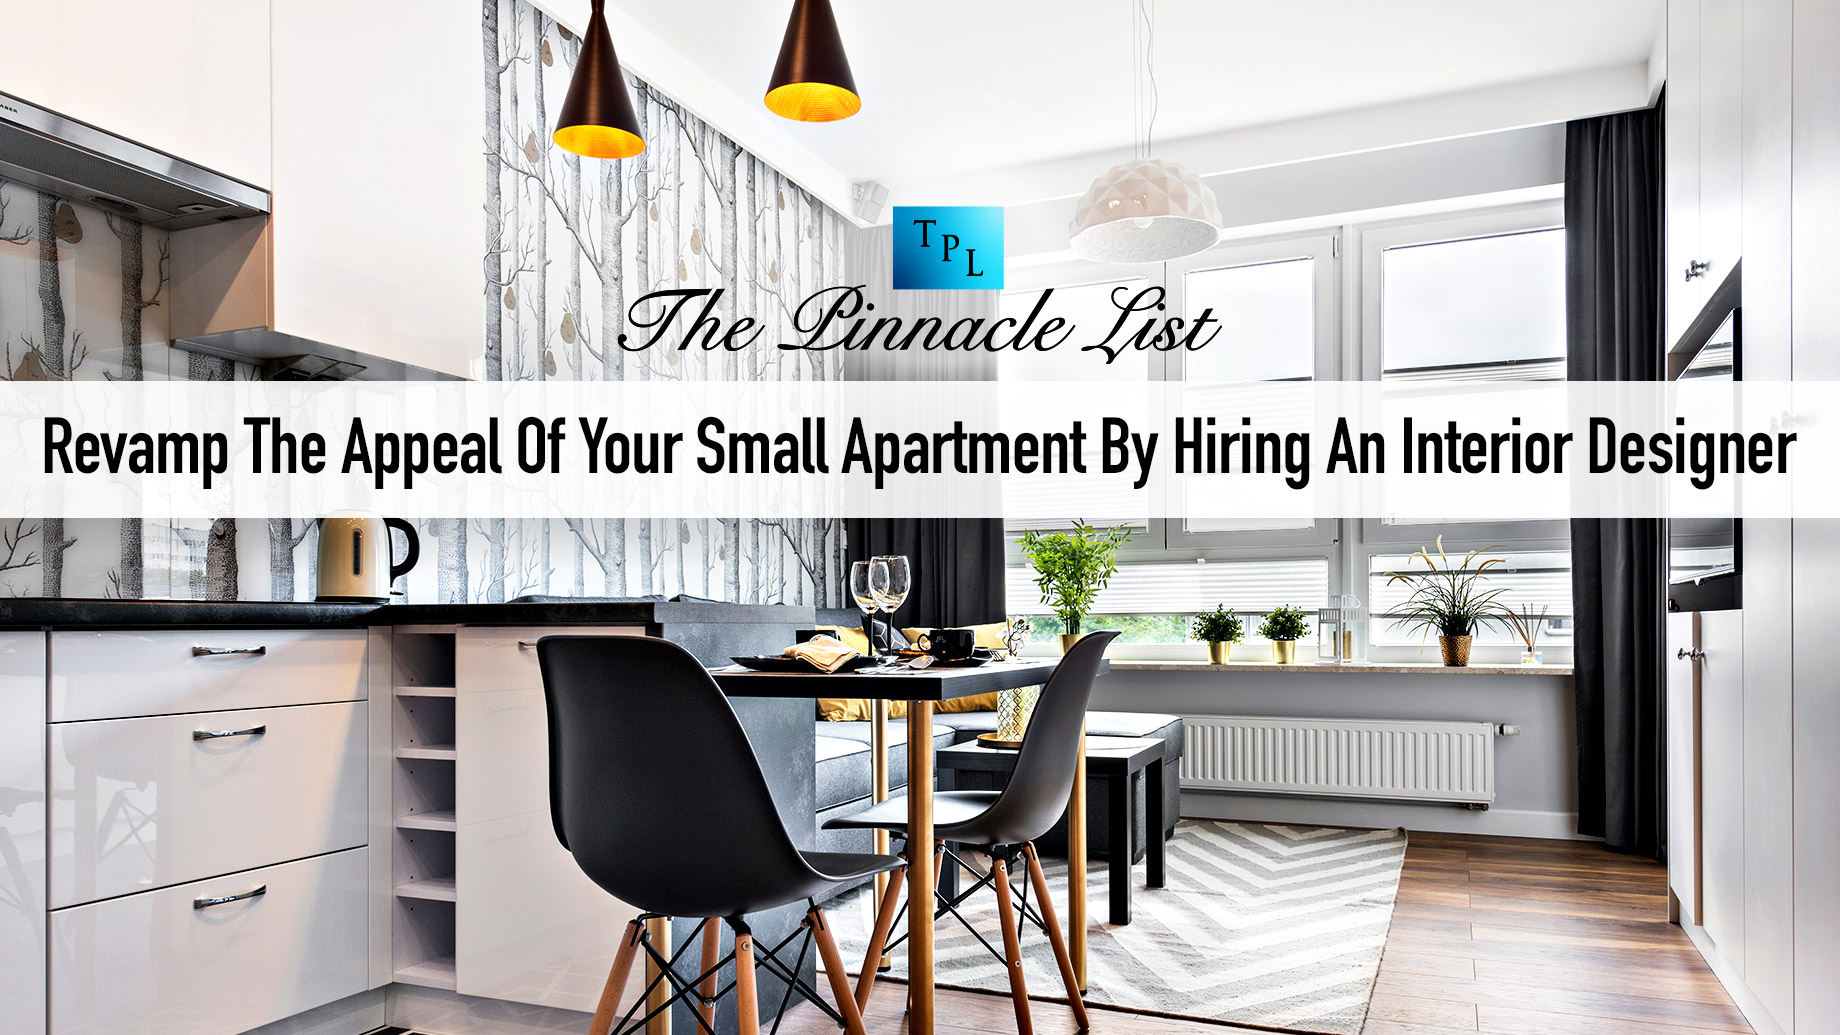 Revamp The Appeal Of Your Small Apartment By Hiring An Interior Designer